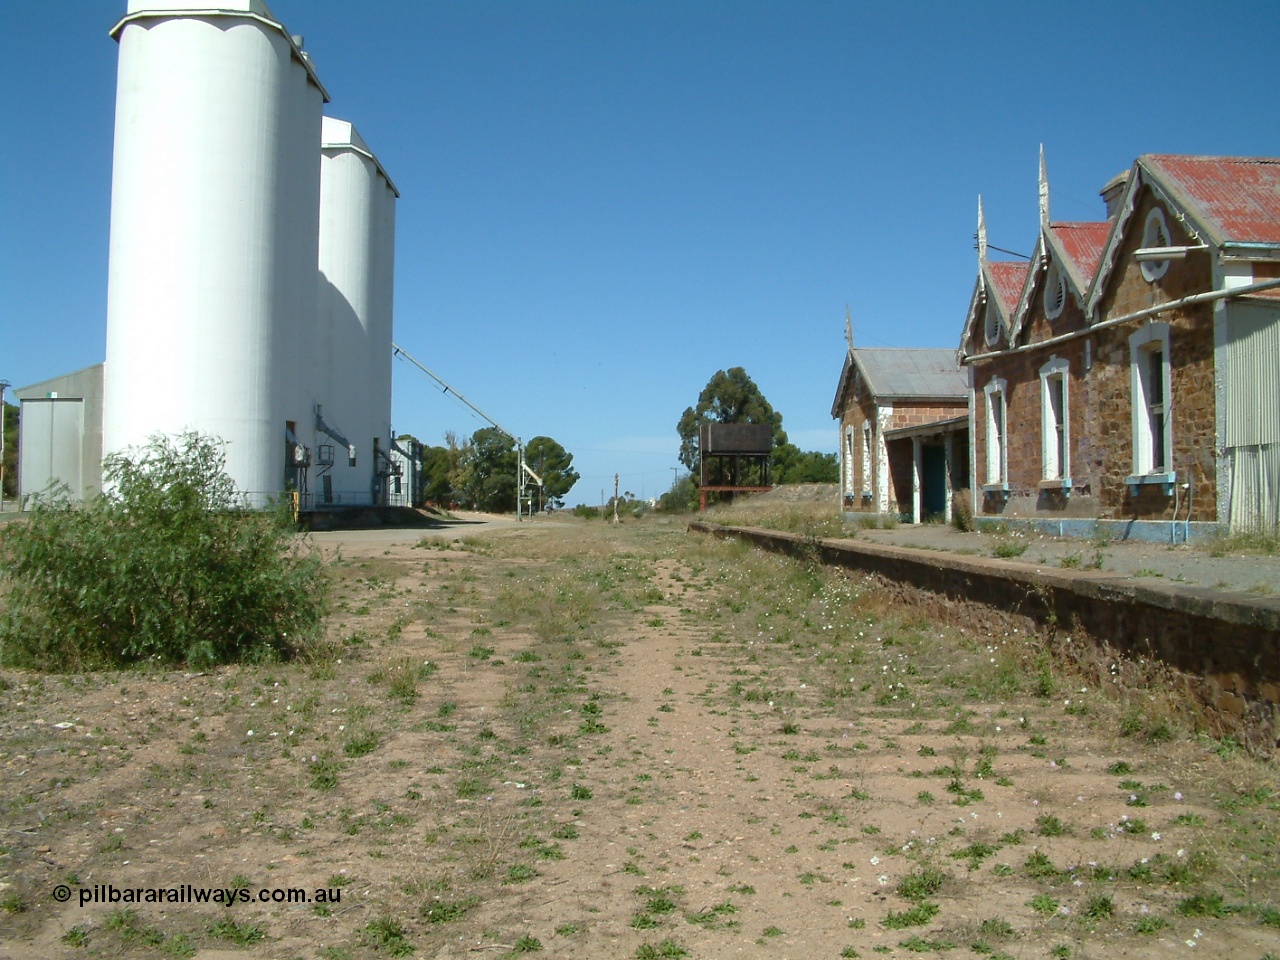 030403 132556
Eudunda railway station yard looking south, track removed, silo complex, elevated water tank and station building. [url=https://goo.gl/maps/bgccZPhjRwP2]GeoData[/url].
